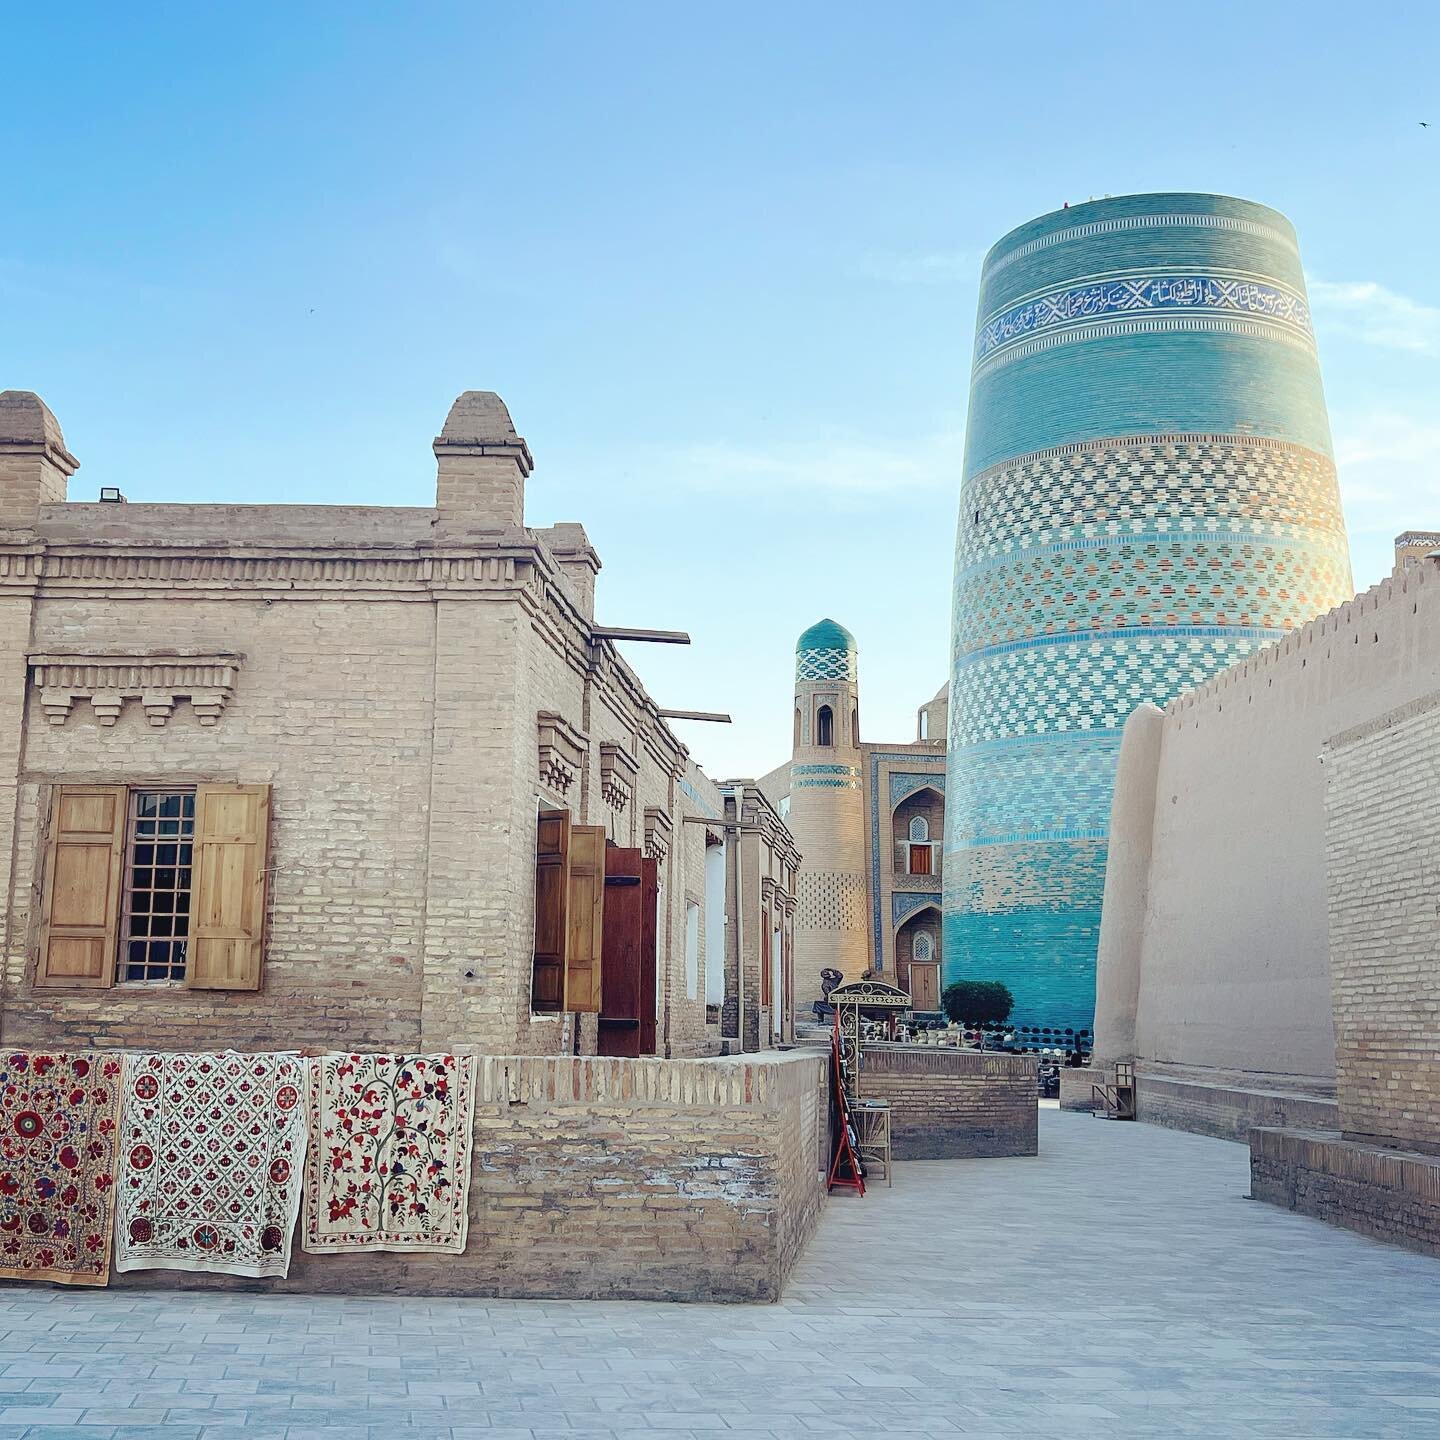 Scenes from Khiva, Uzbekistan 🇺🇿 

Located in the Khorezm Region, in the west of the country and almost at the border with Turkmenistan, is Khiva, one of Central Asia&rsquo;s oldest cities, founded in the 5th century B.C. 

Today, the Ichan Kala, o